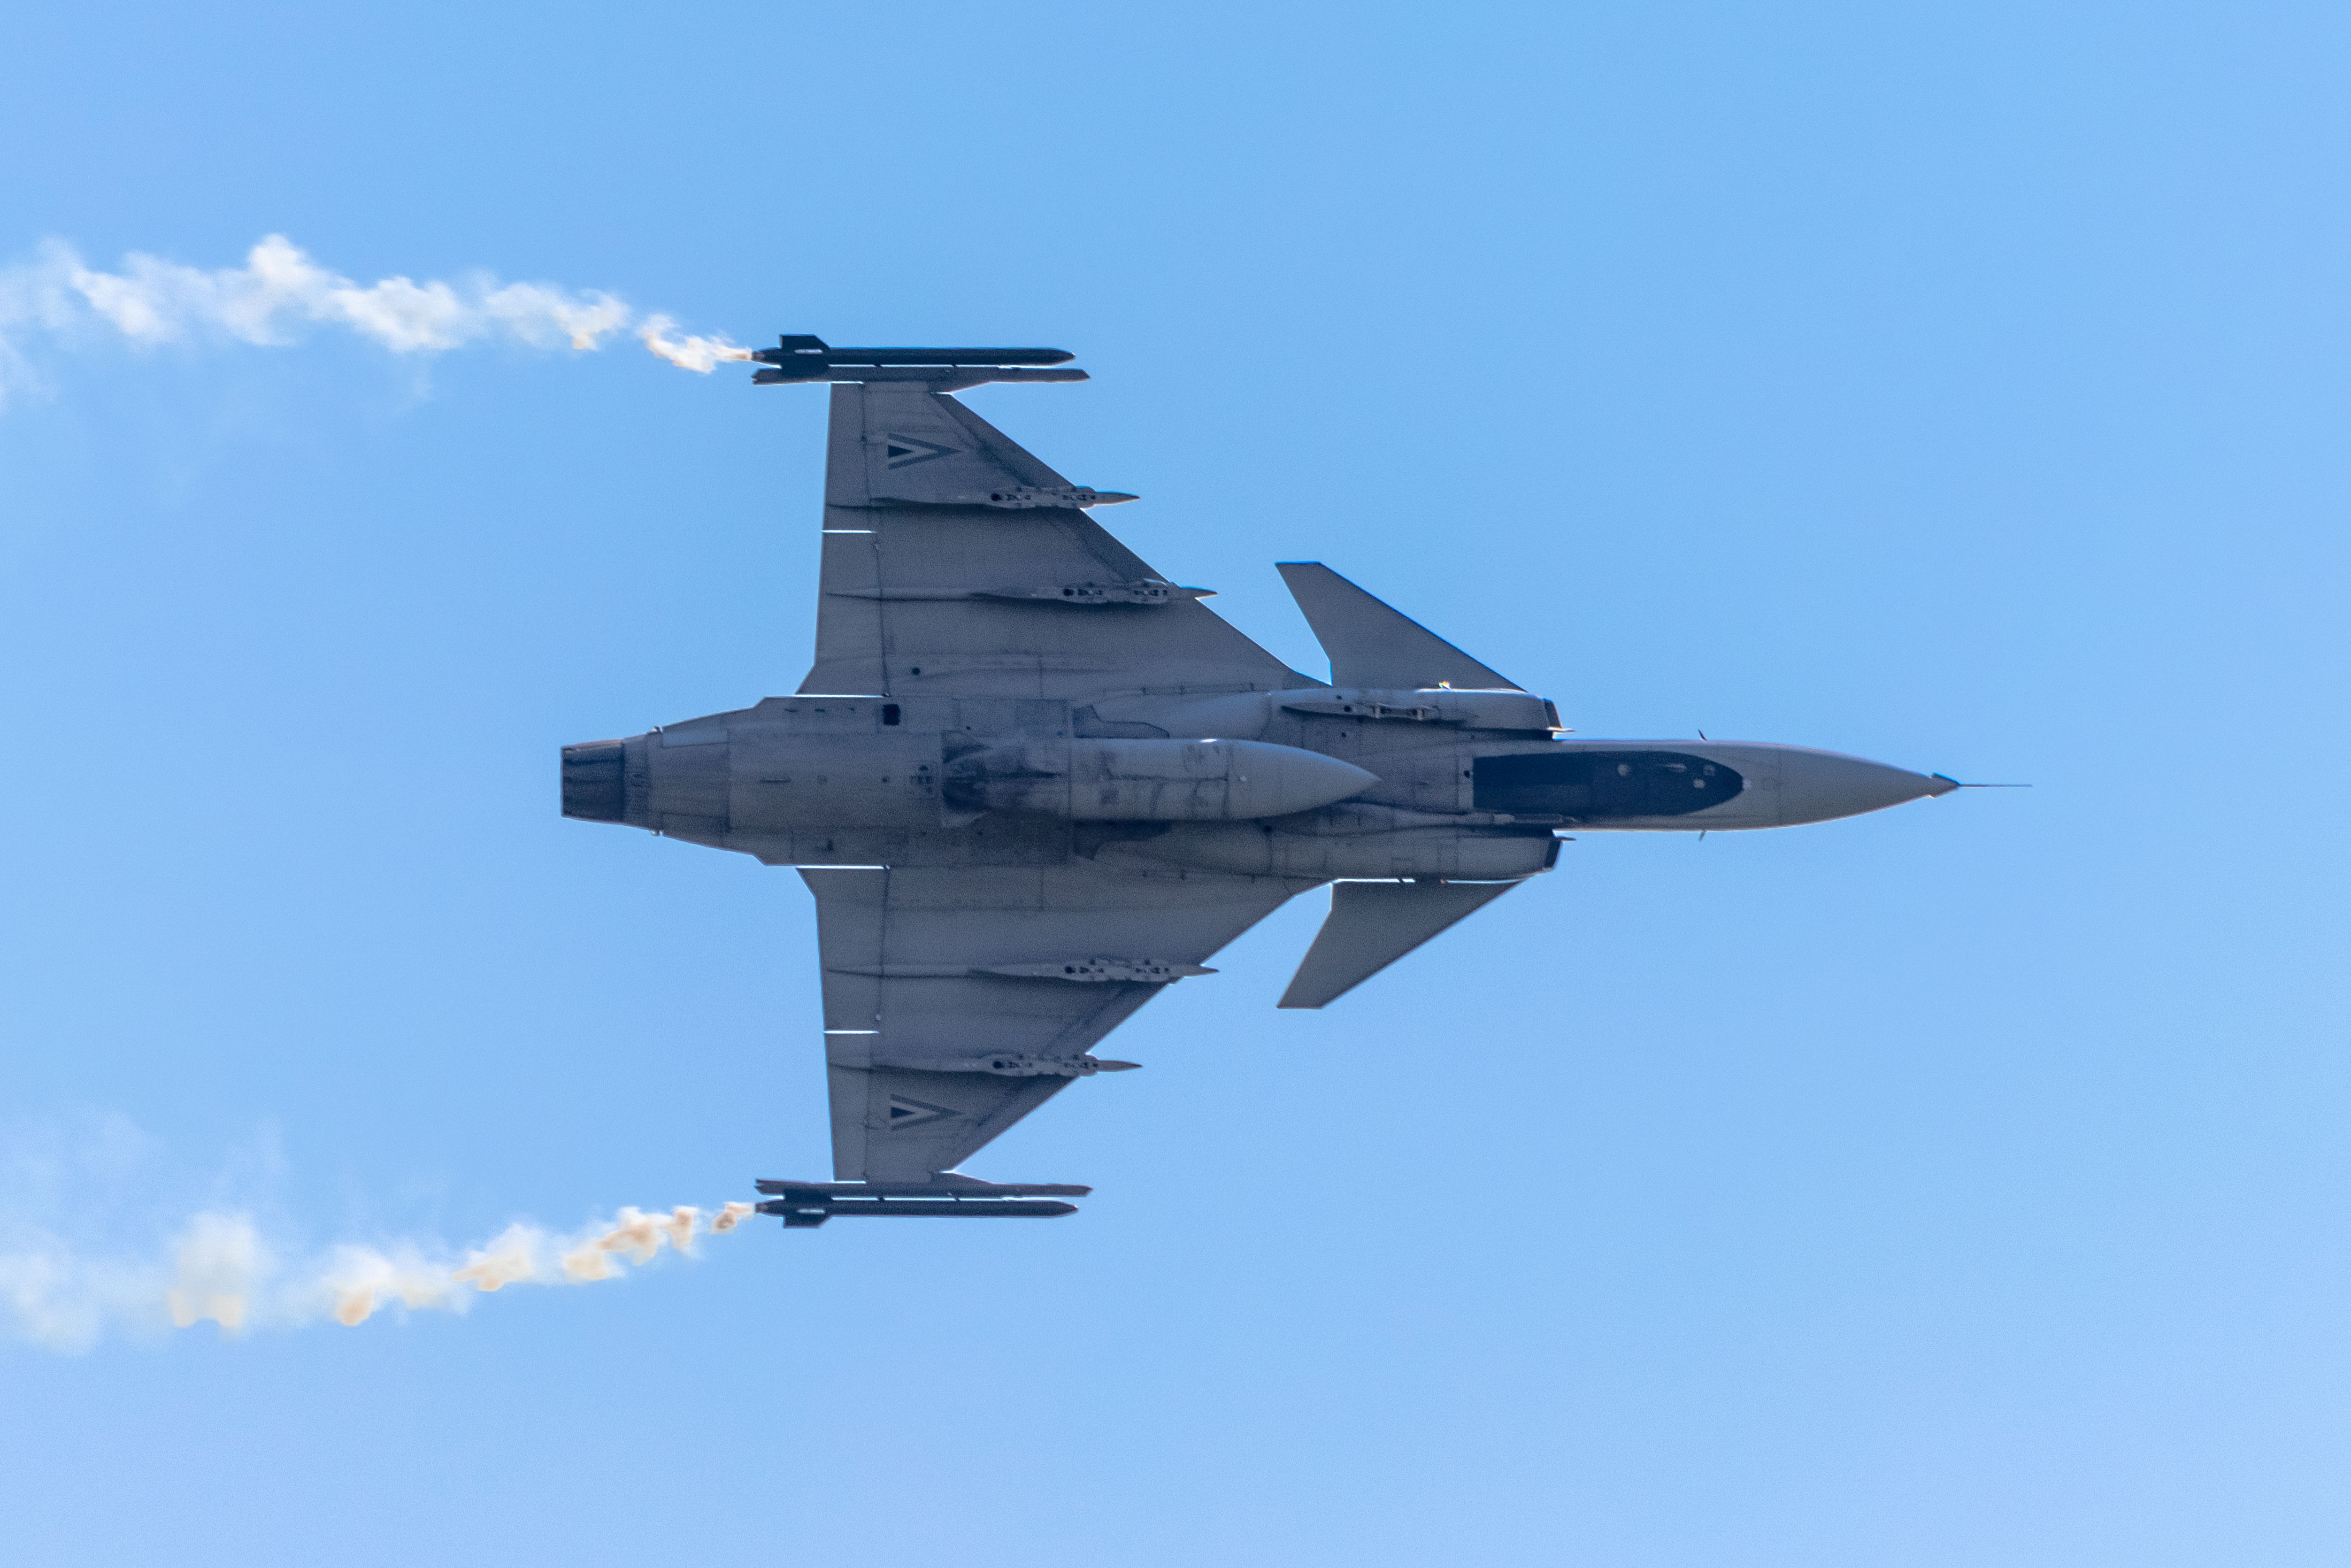 JAS 39 Gripen from Hungary performing stunts at the airshow